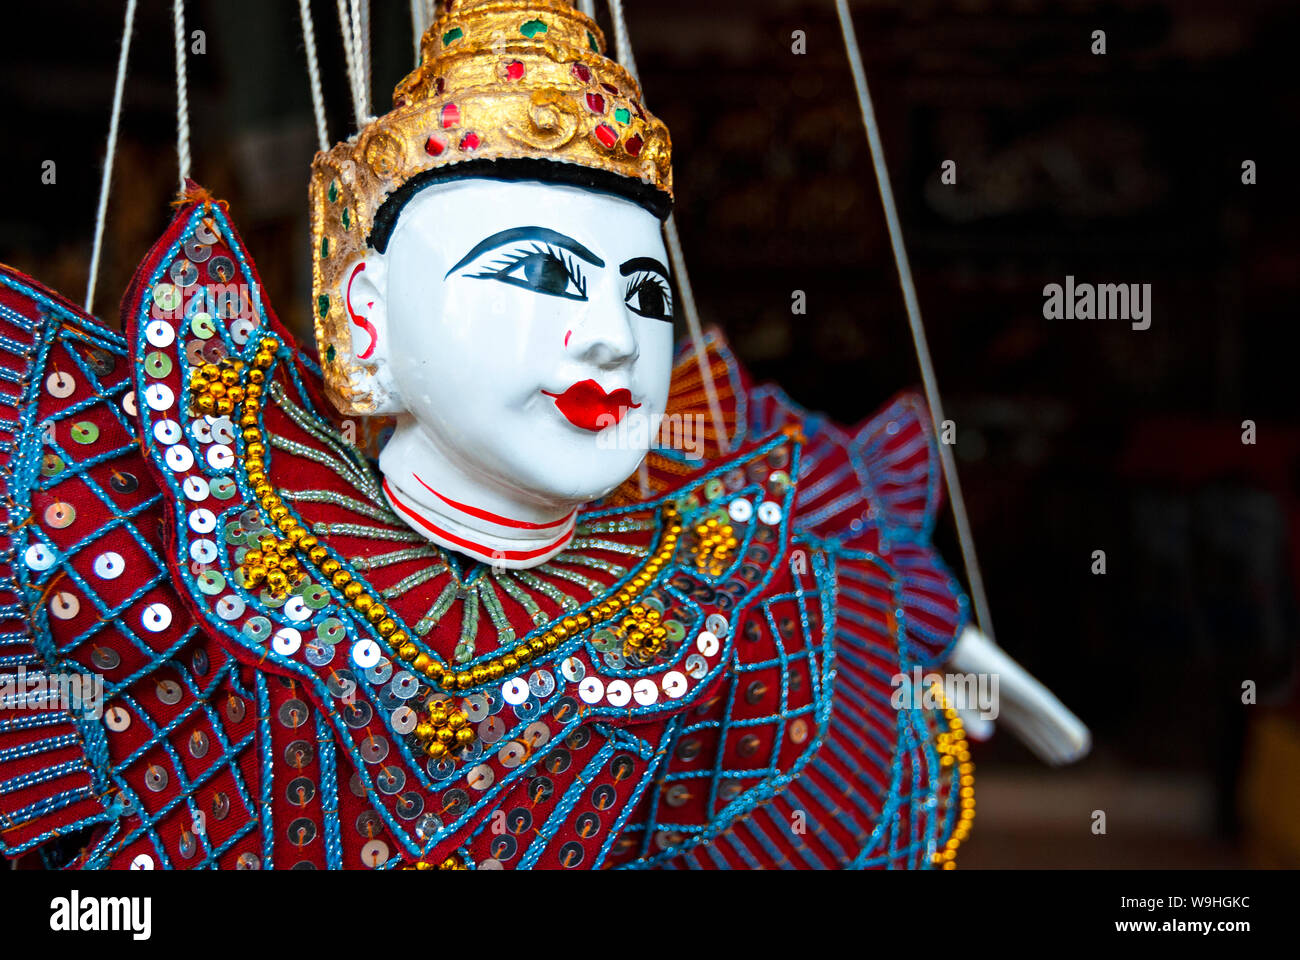 Portrait of a marionette in a local art and craft market in Yangon, Myanmar. Stock Photo